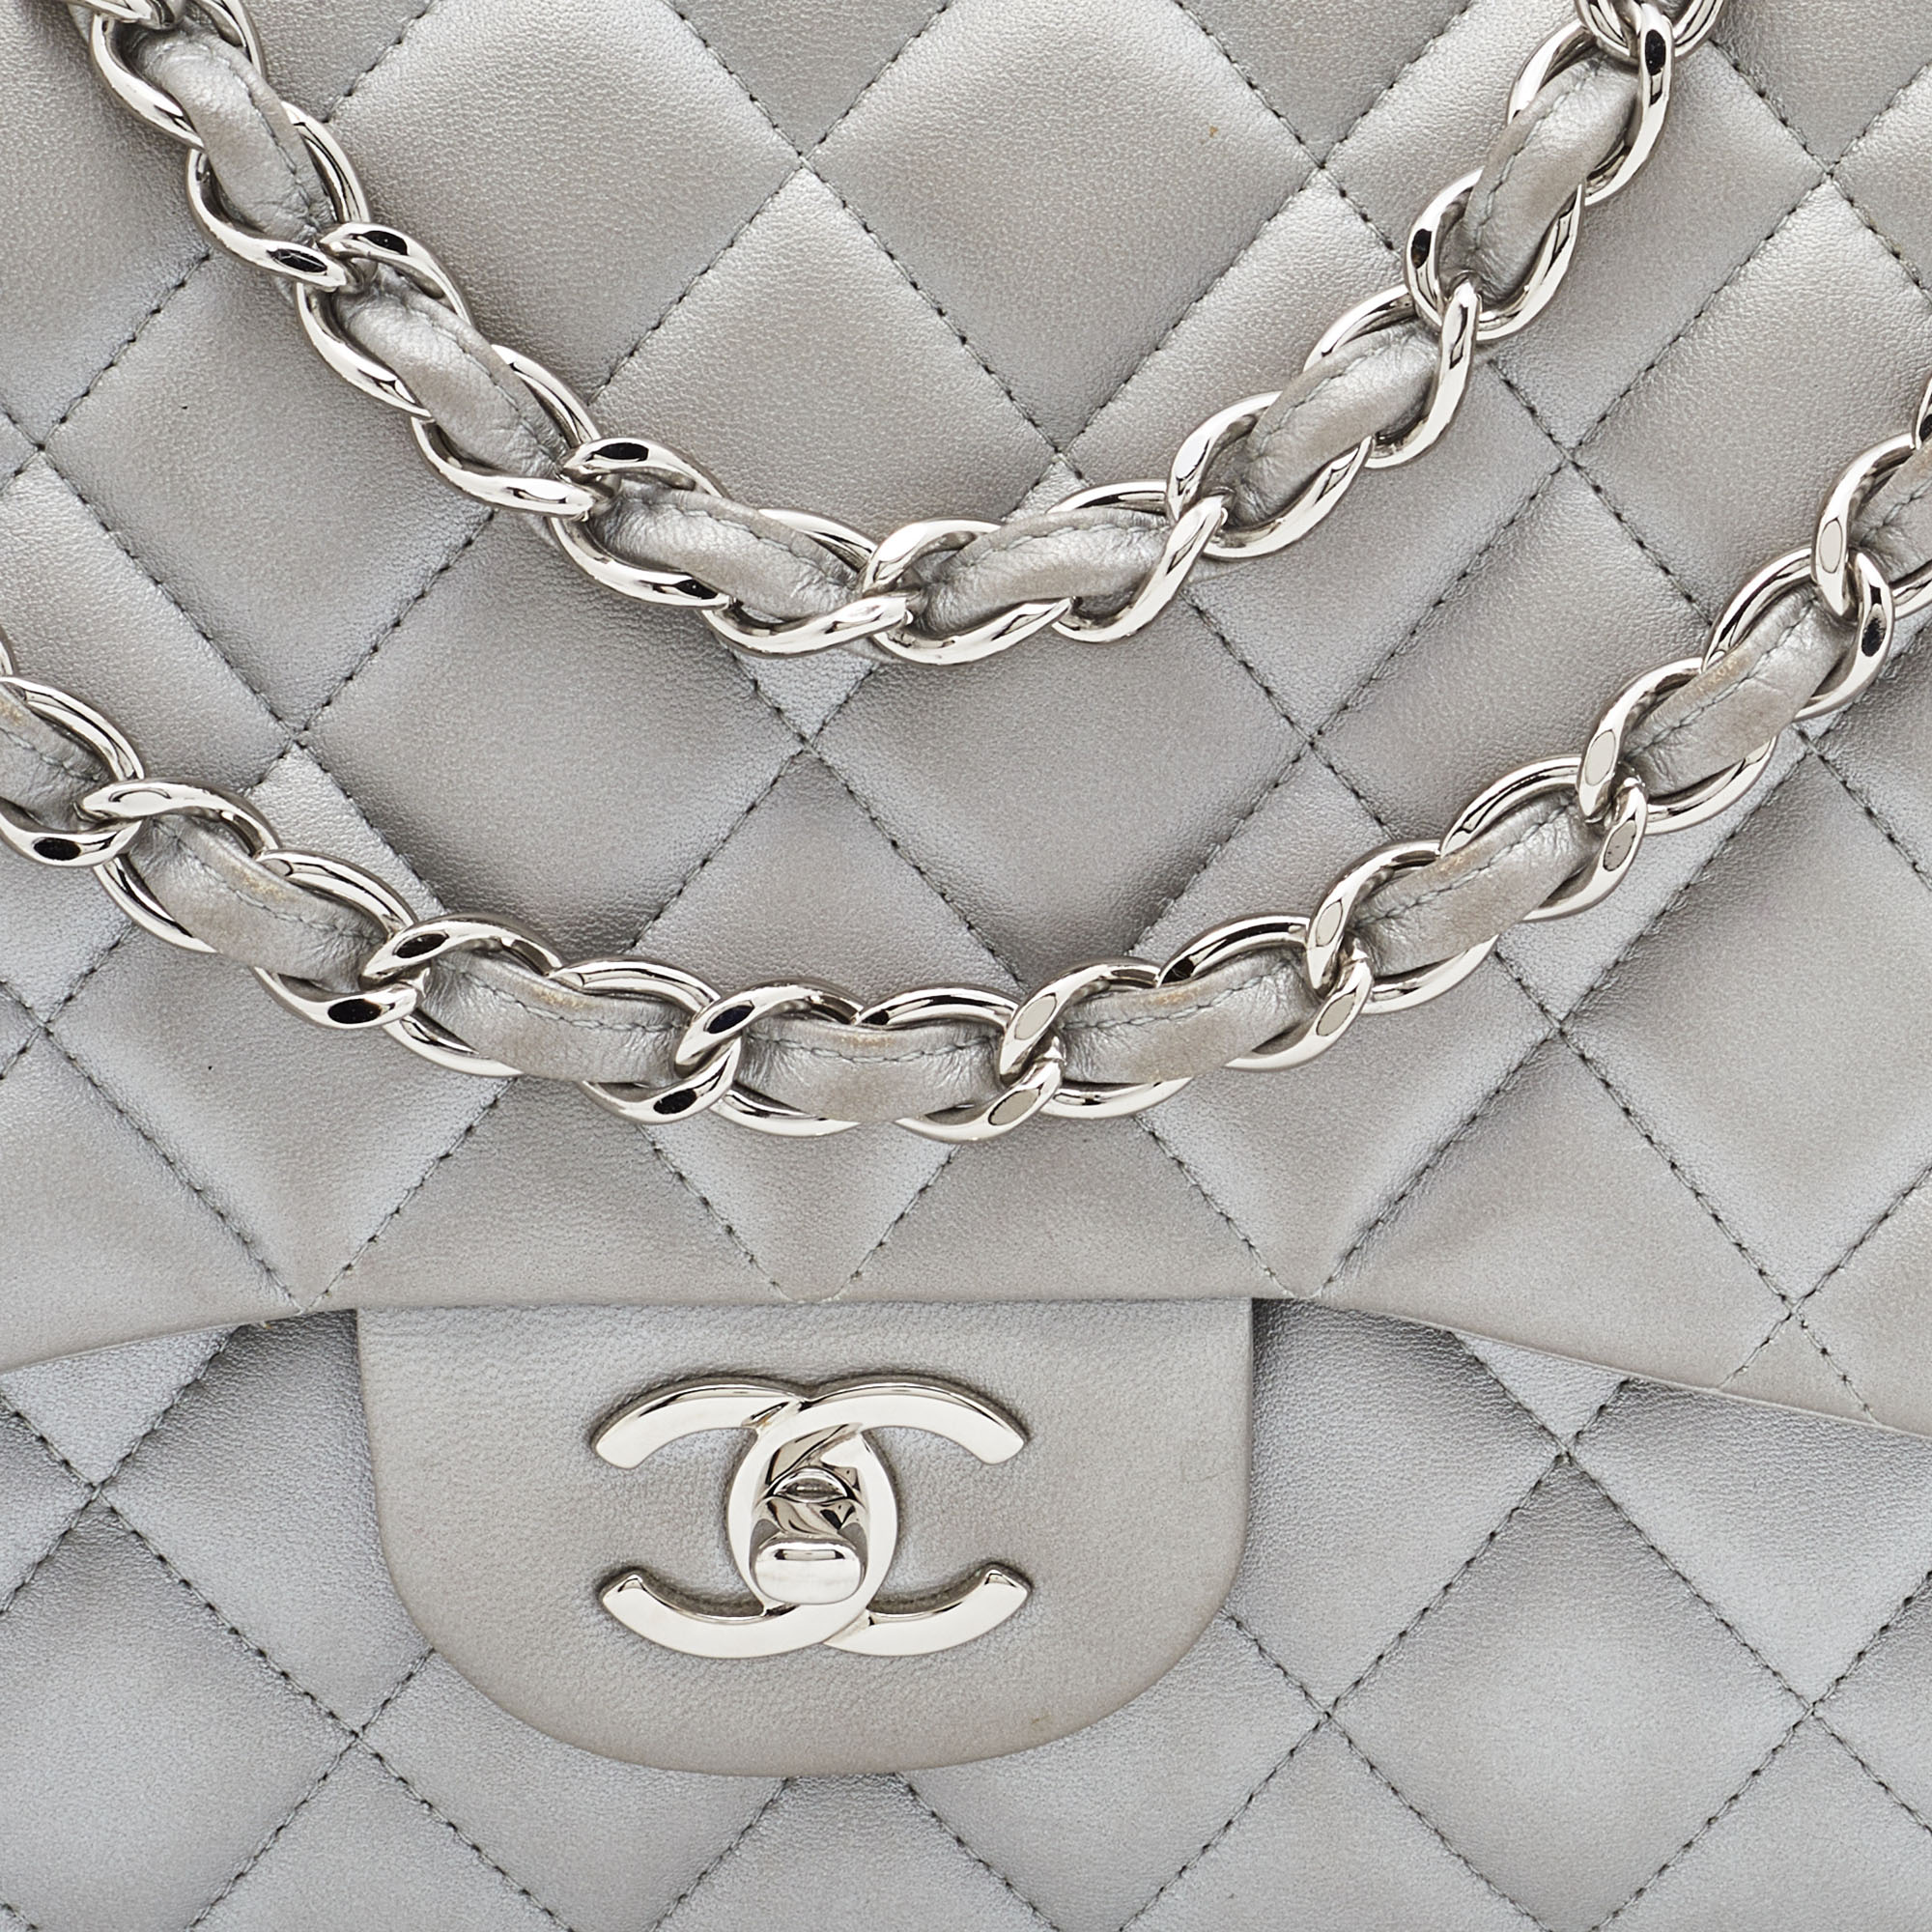 Chanel Silver Quilted Lambskin Leather Jumbo Classic Double Flap Bag